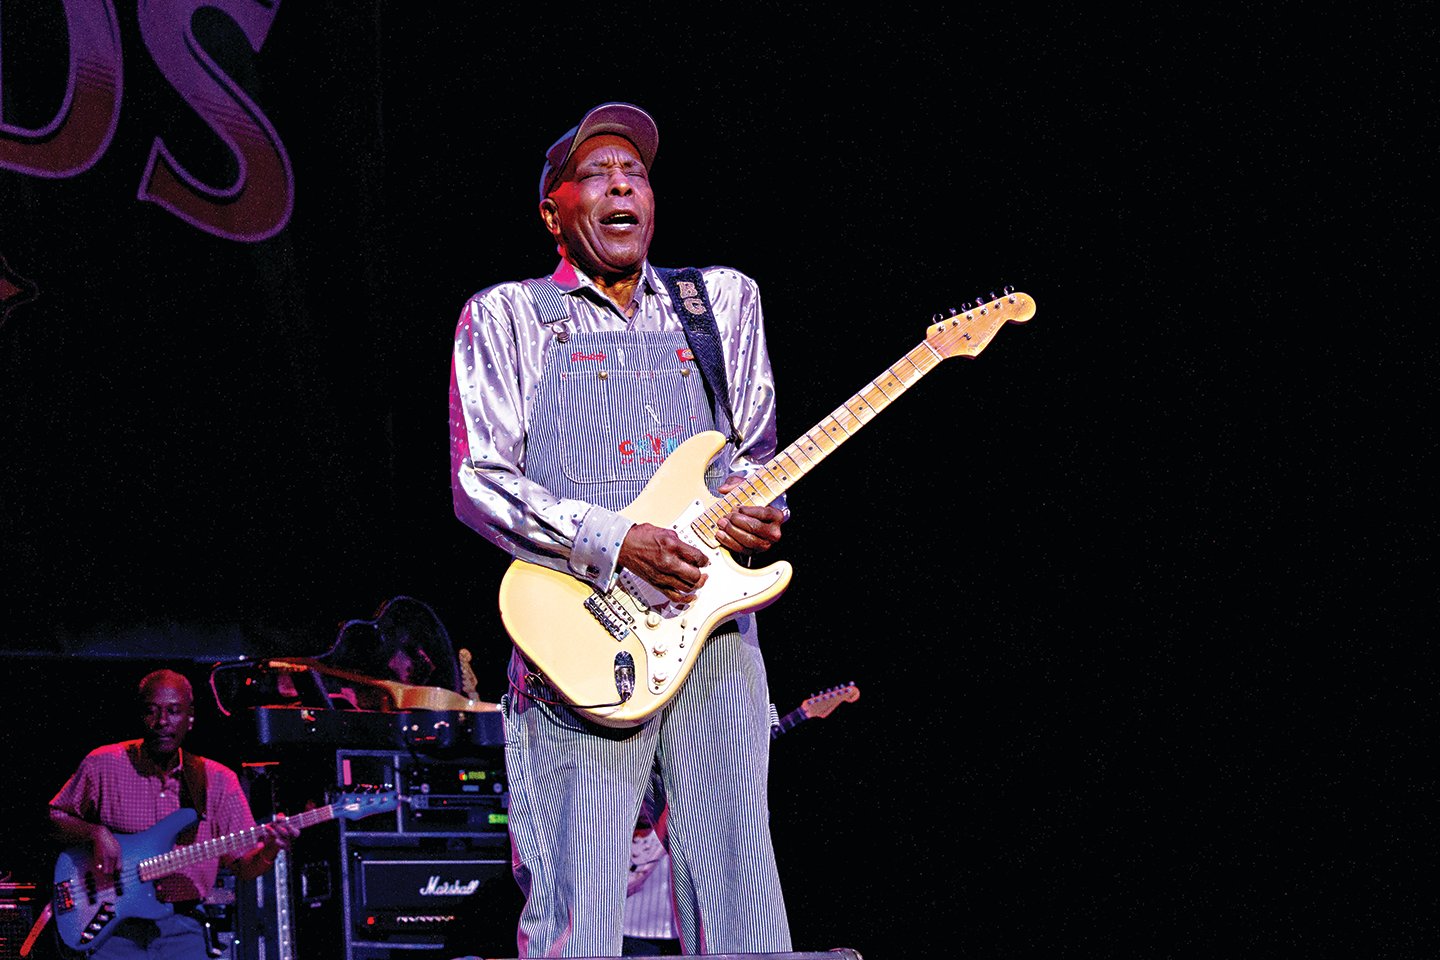 Blues legend Buddy Guy during the Blues Festival at Bethel Woods Center for the Arts.